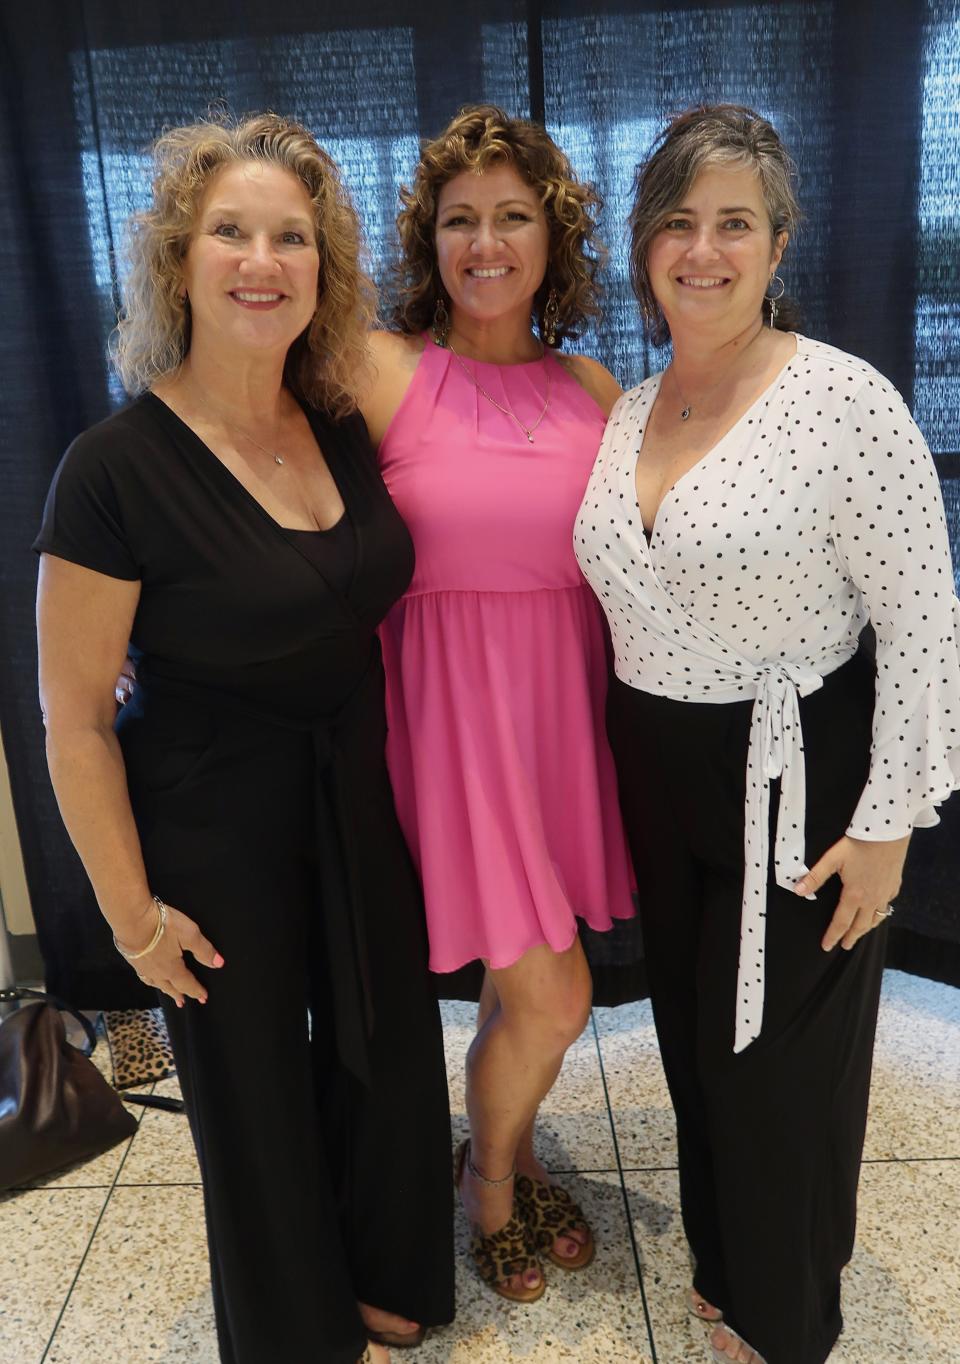 Sandra Fair, Helana Holt, and Linda Ferrington attended the Salt and Light Benefit Dinner for Area Relief Ministries (ARM) held at the Carl Perkins Civic Center in Jackson, Tennessee on Sunday, September 11, 2022.